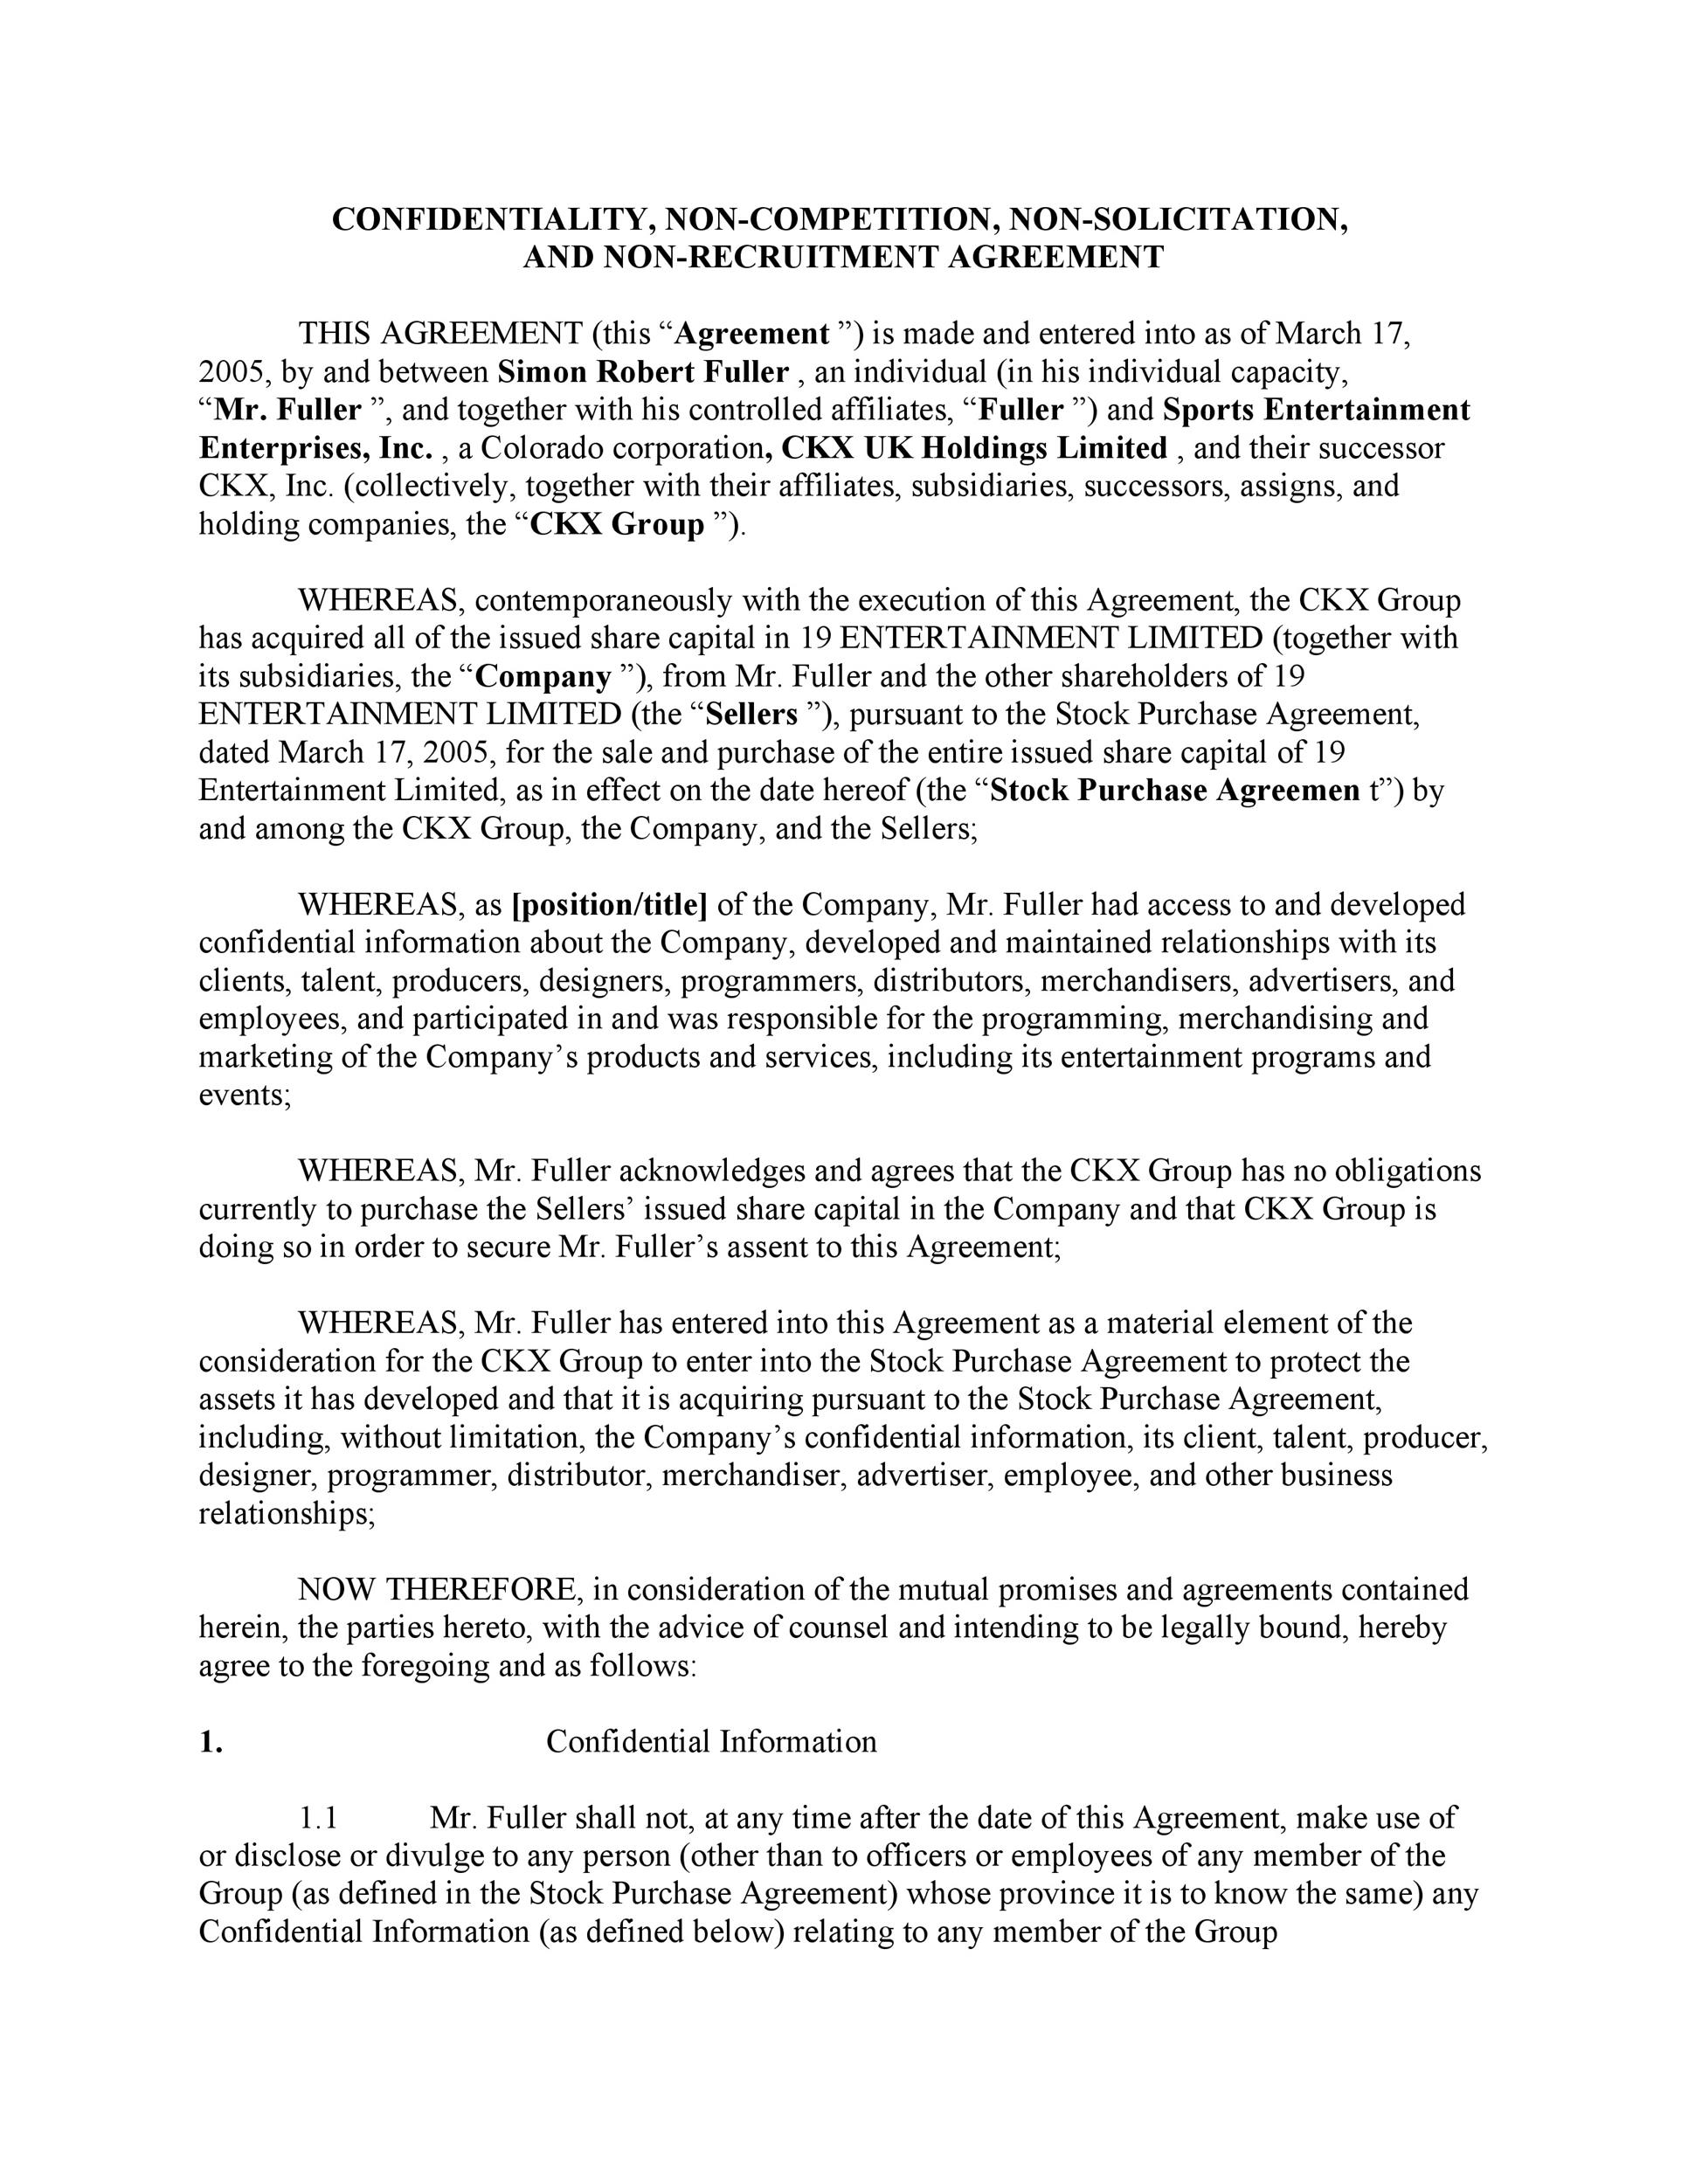 Free Non-Compete Agreement Template 27